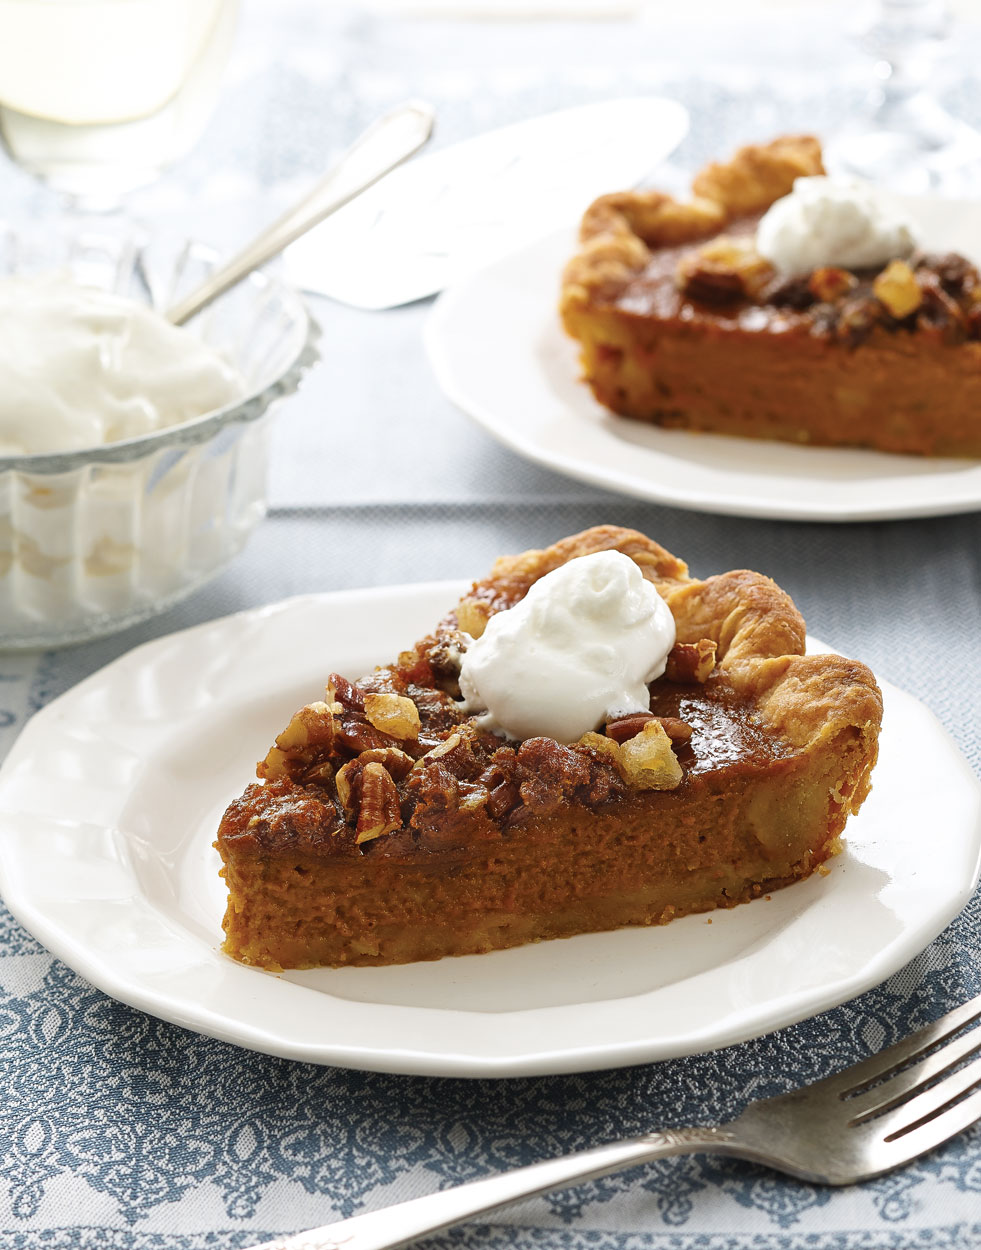 Gingerbread-Pumpkin Pie with Streusel Topping